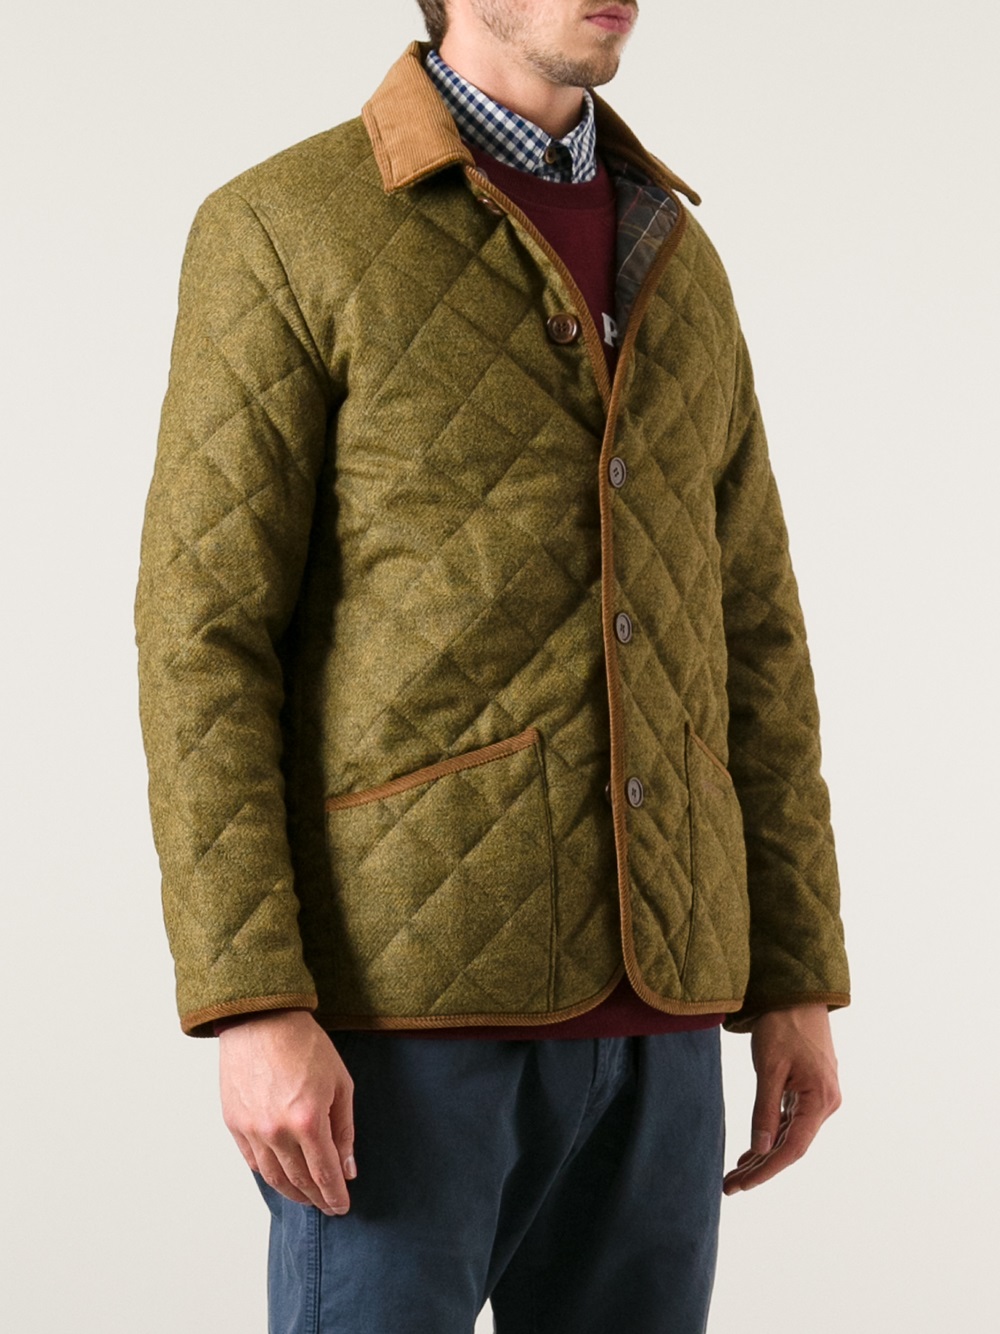 Barbour Quilted Jacket in Brown (Natural) for Men - Lyst